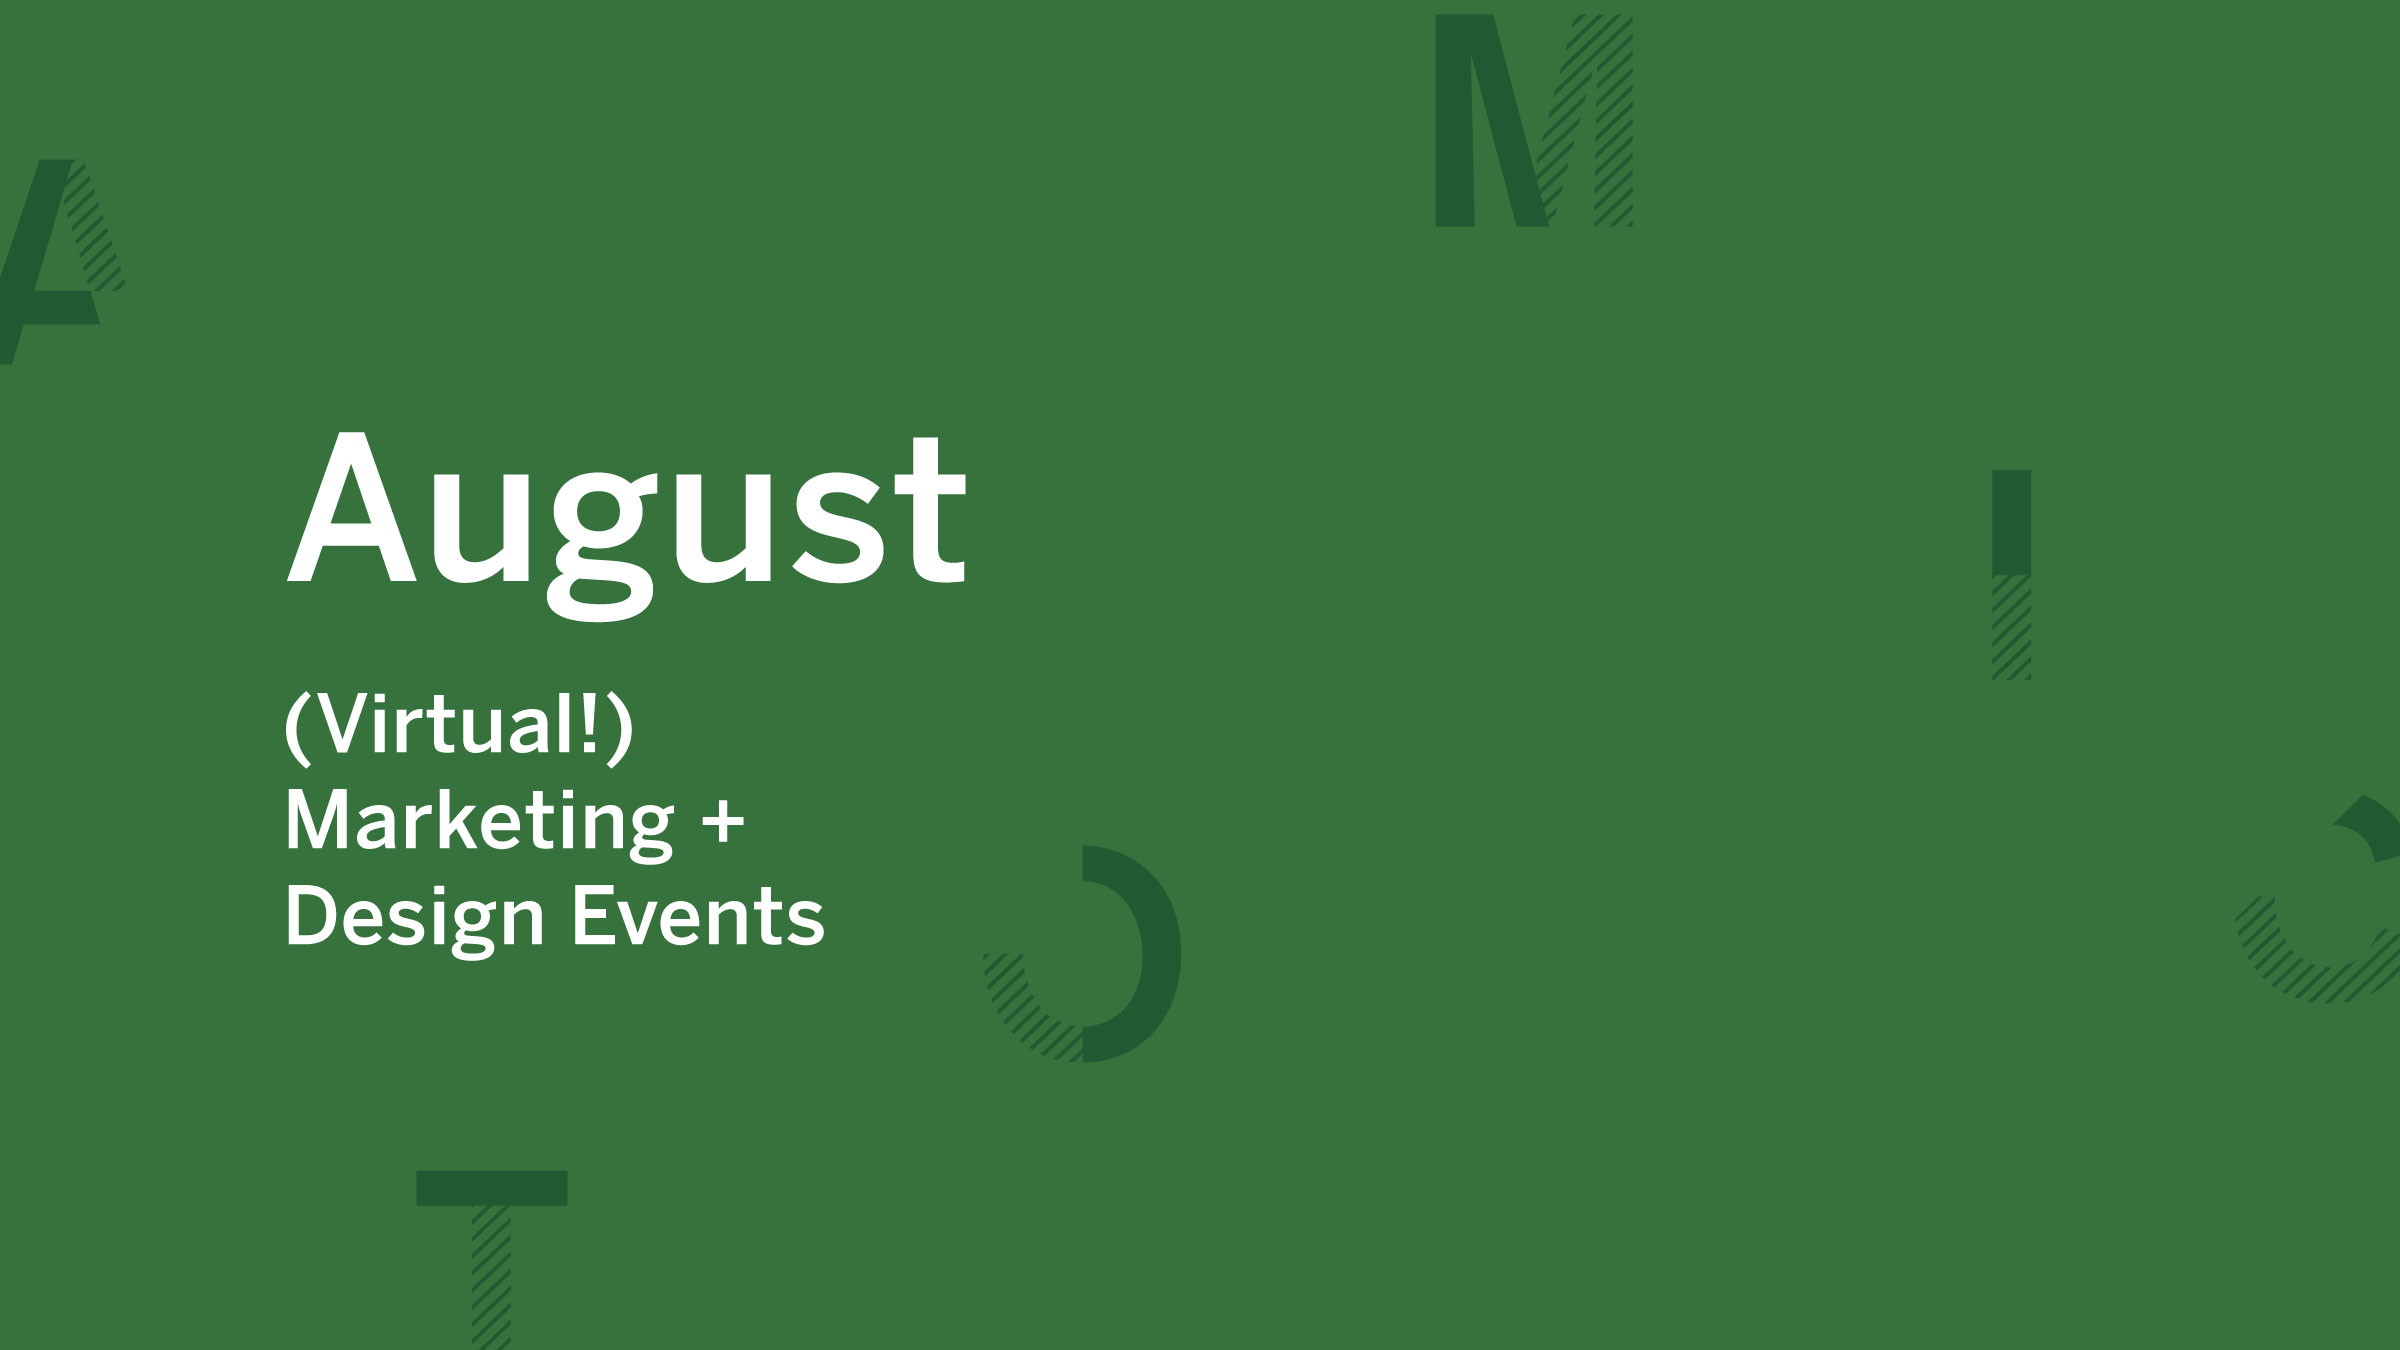 August 2020 virtual marketing and design events